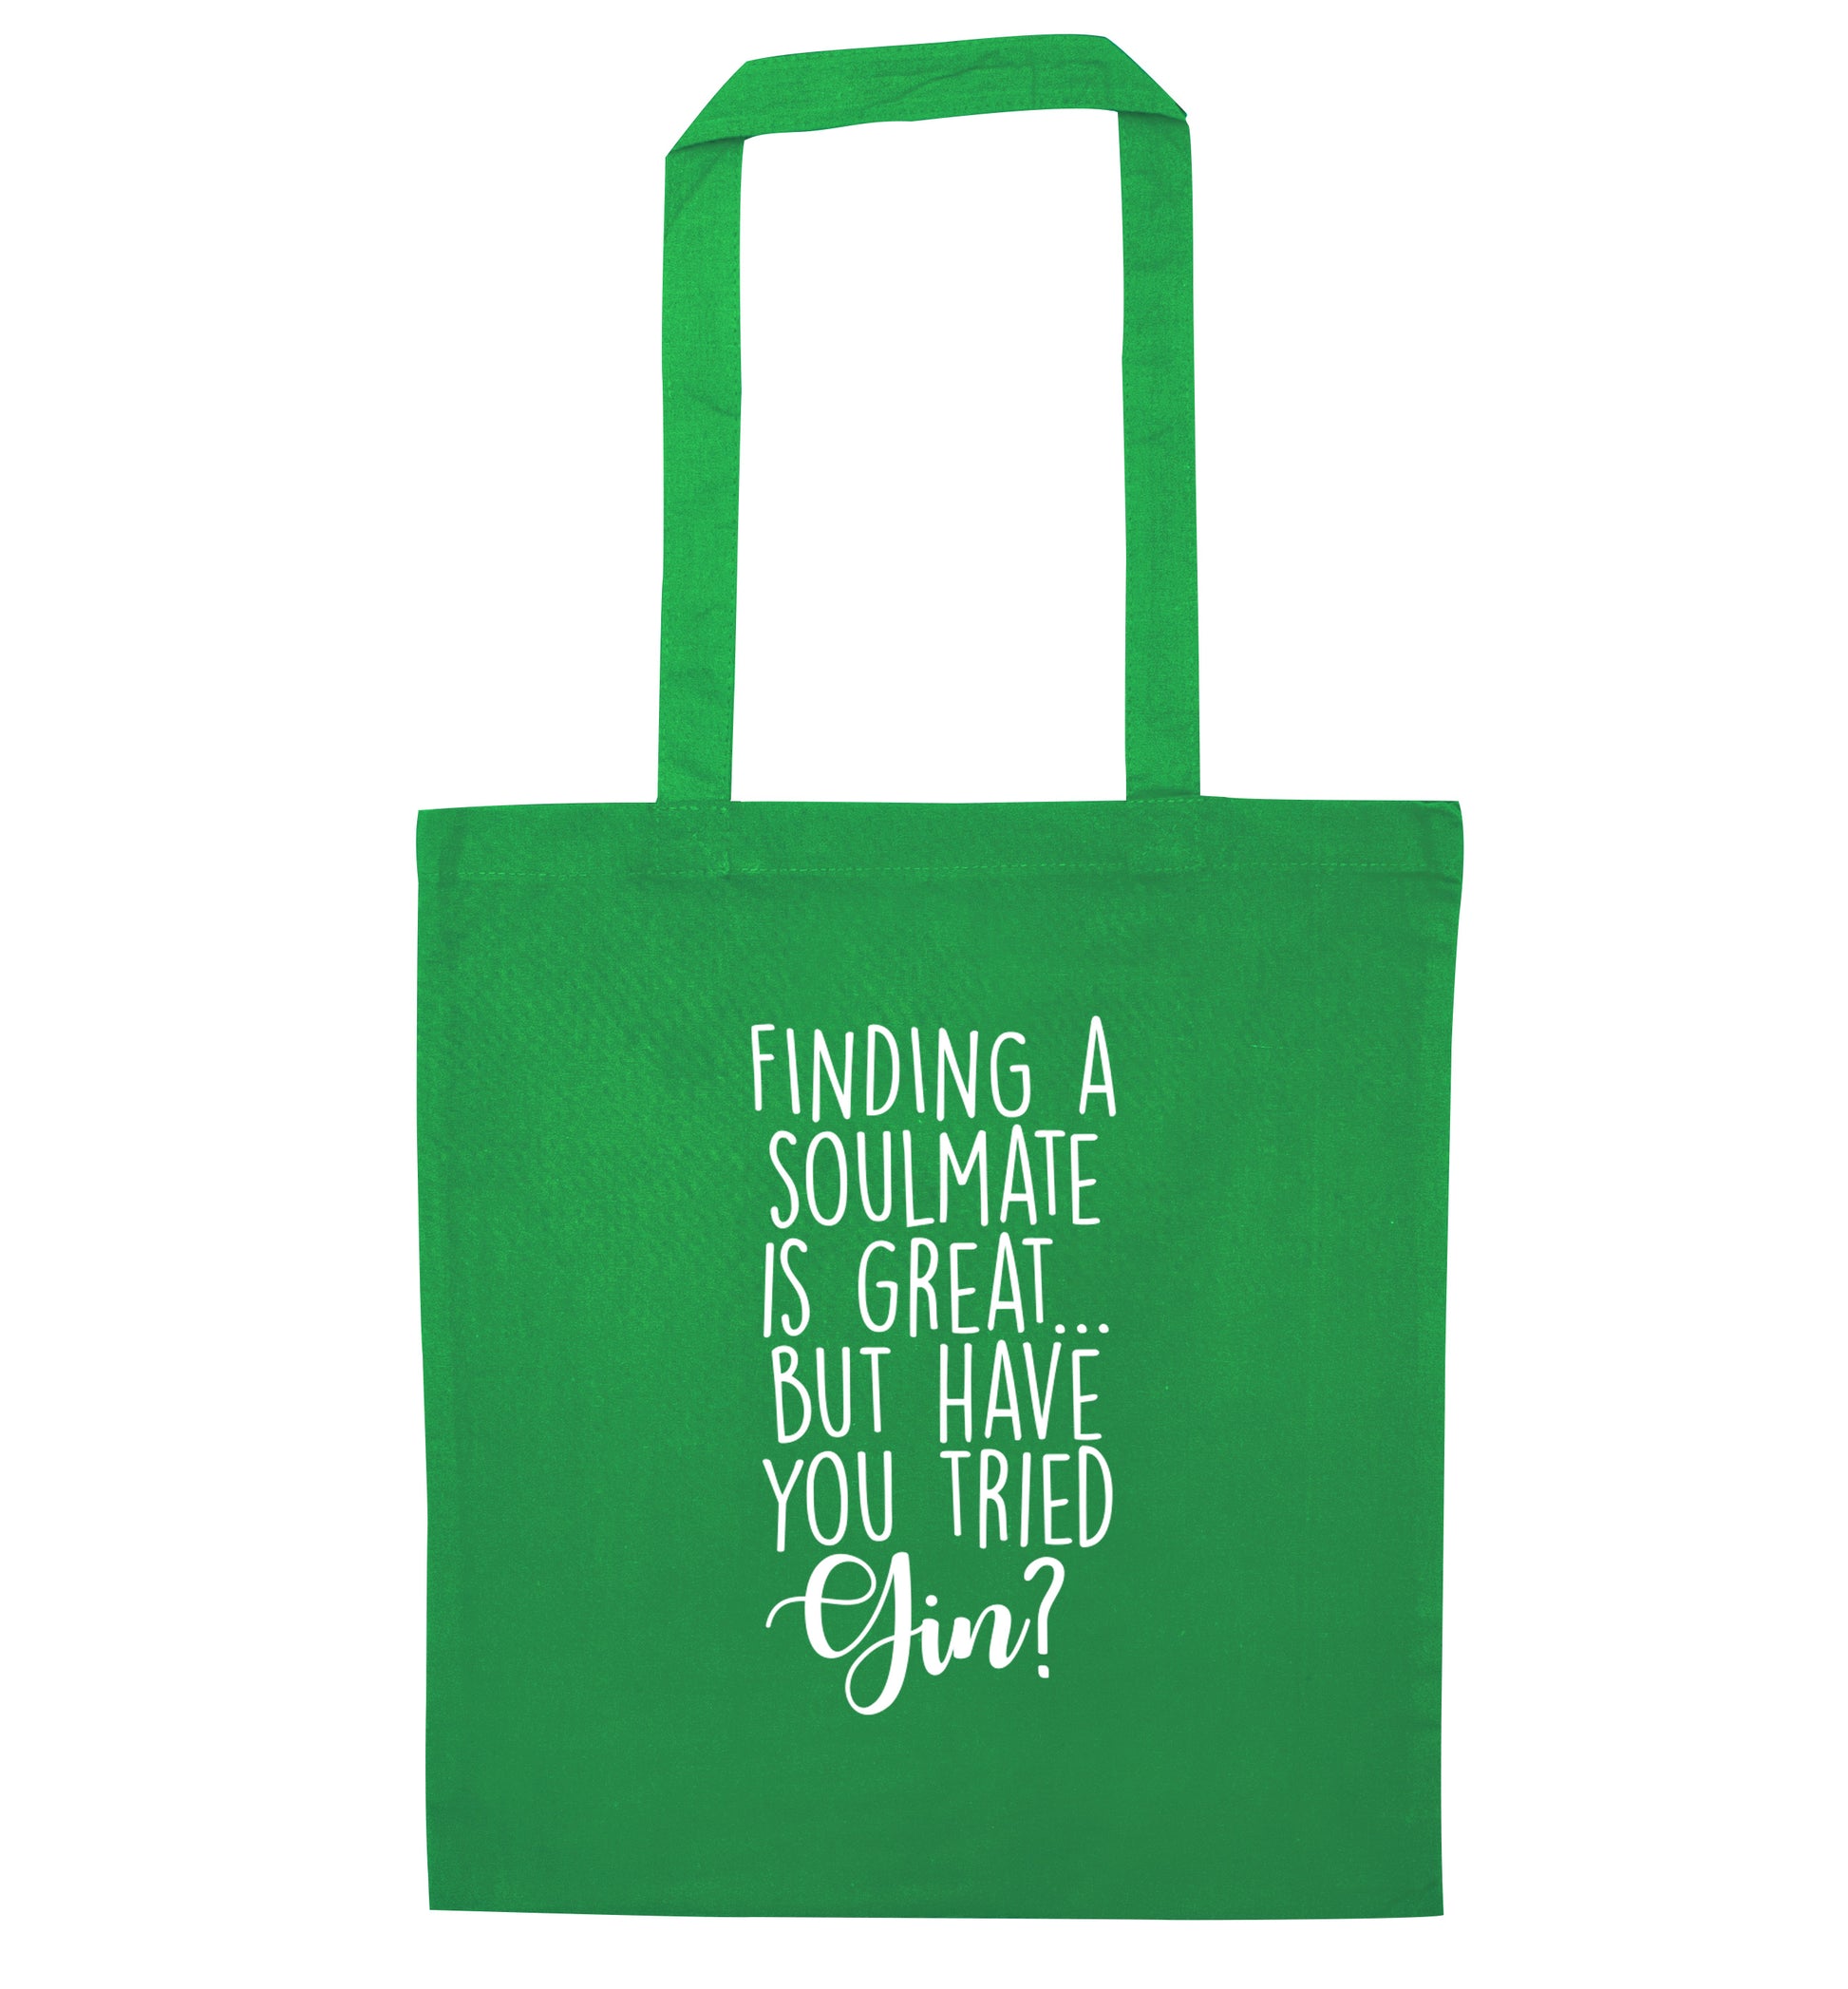 Finding a soulmate is great but have you tried gin? green tote bag